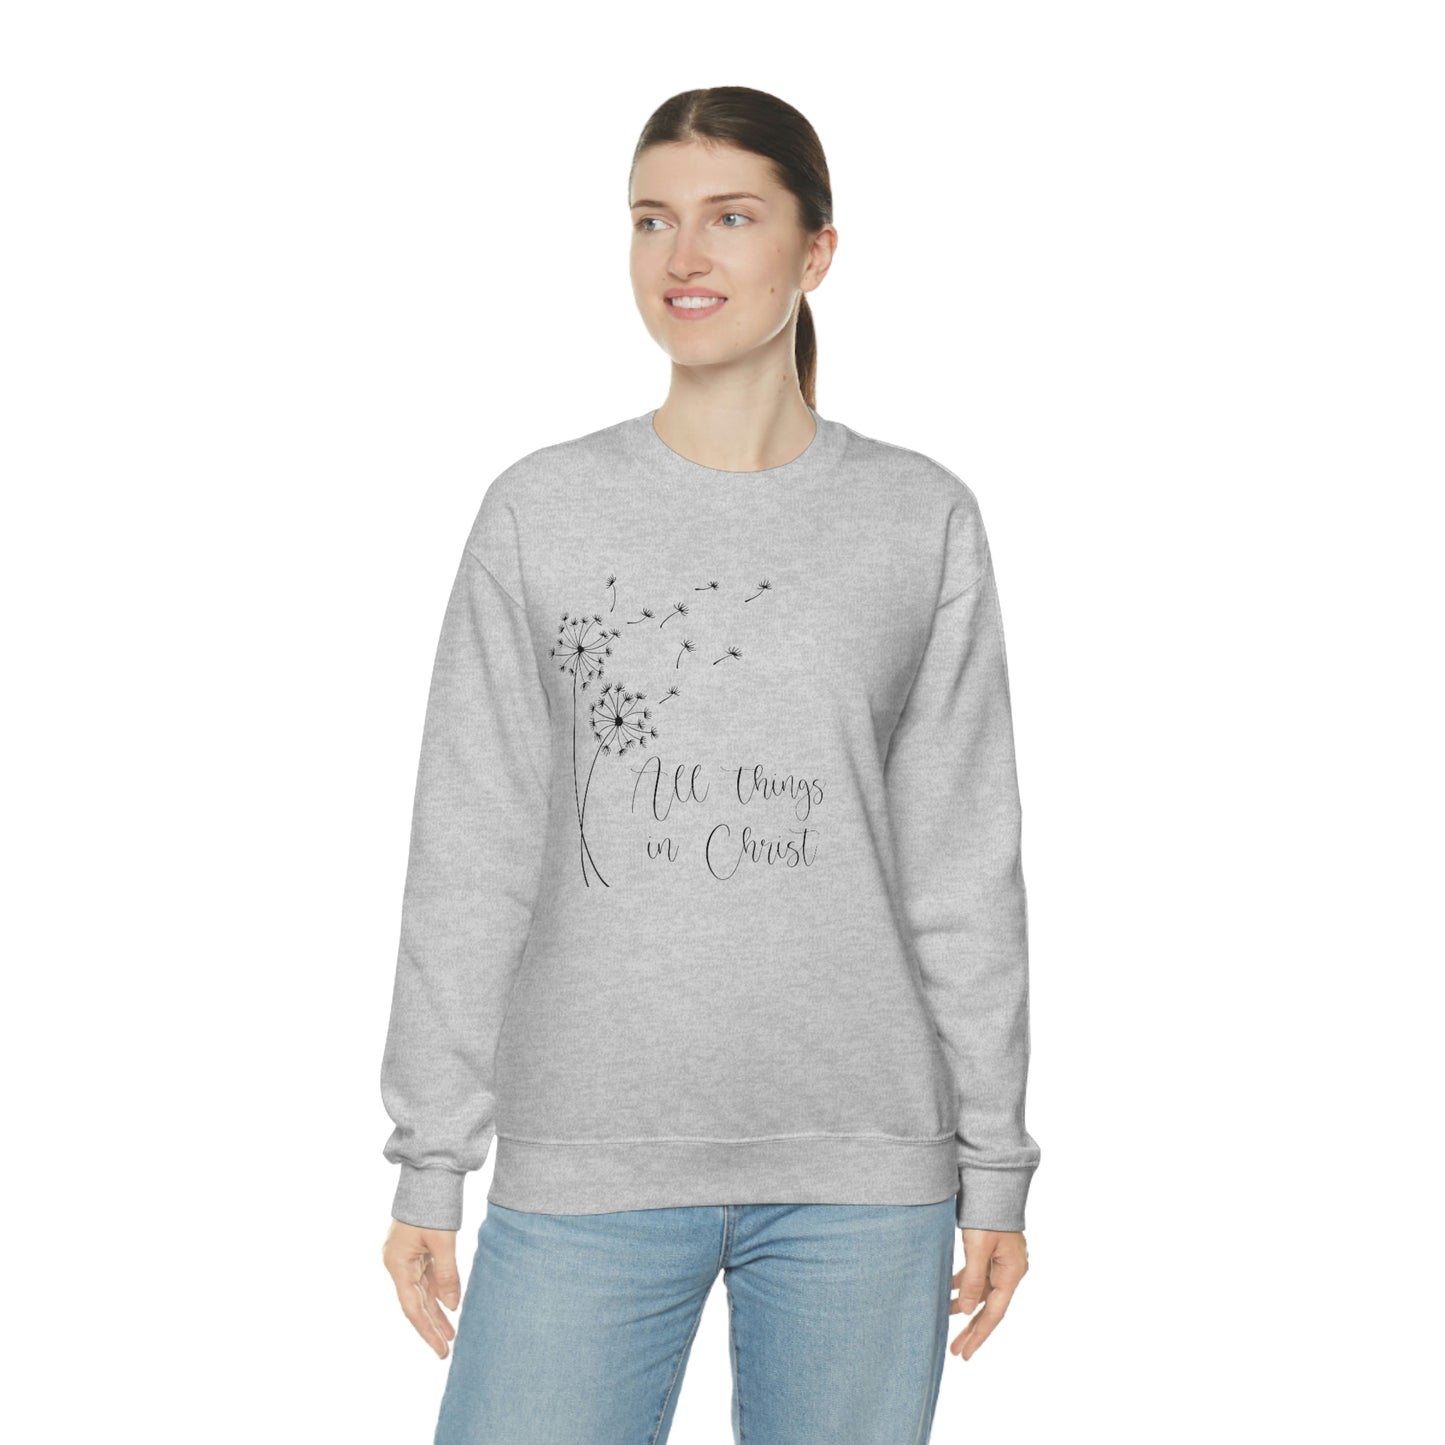 Unisex Heavy Blend Crewneck Sweatshirt, All Things In Christ, Dandelion Seeds, Philippians 4:13, 2023 Youth Theme, LDS Young Women